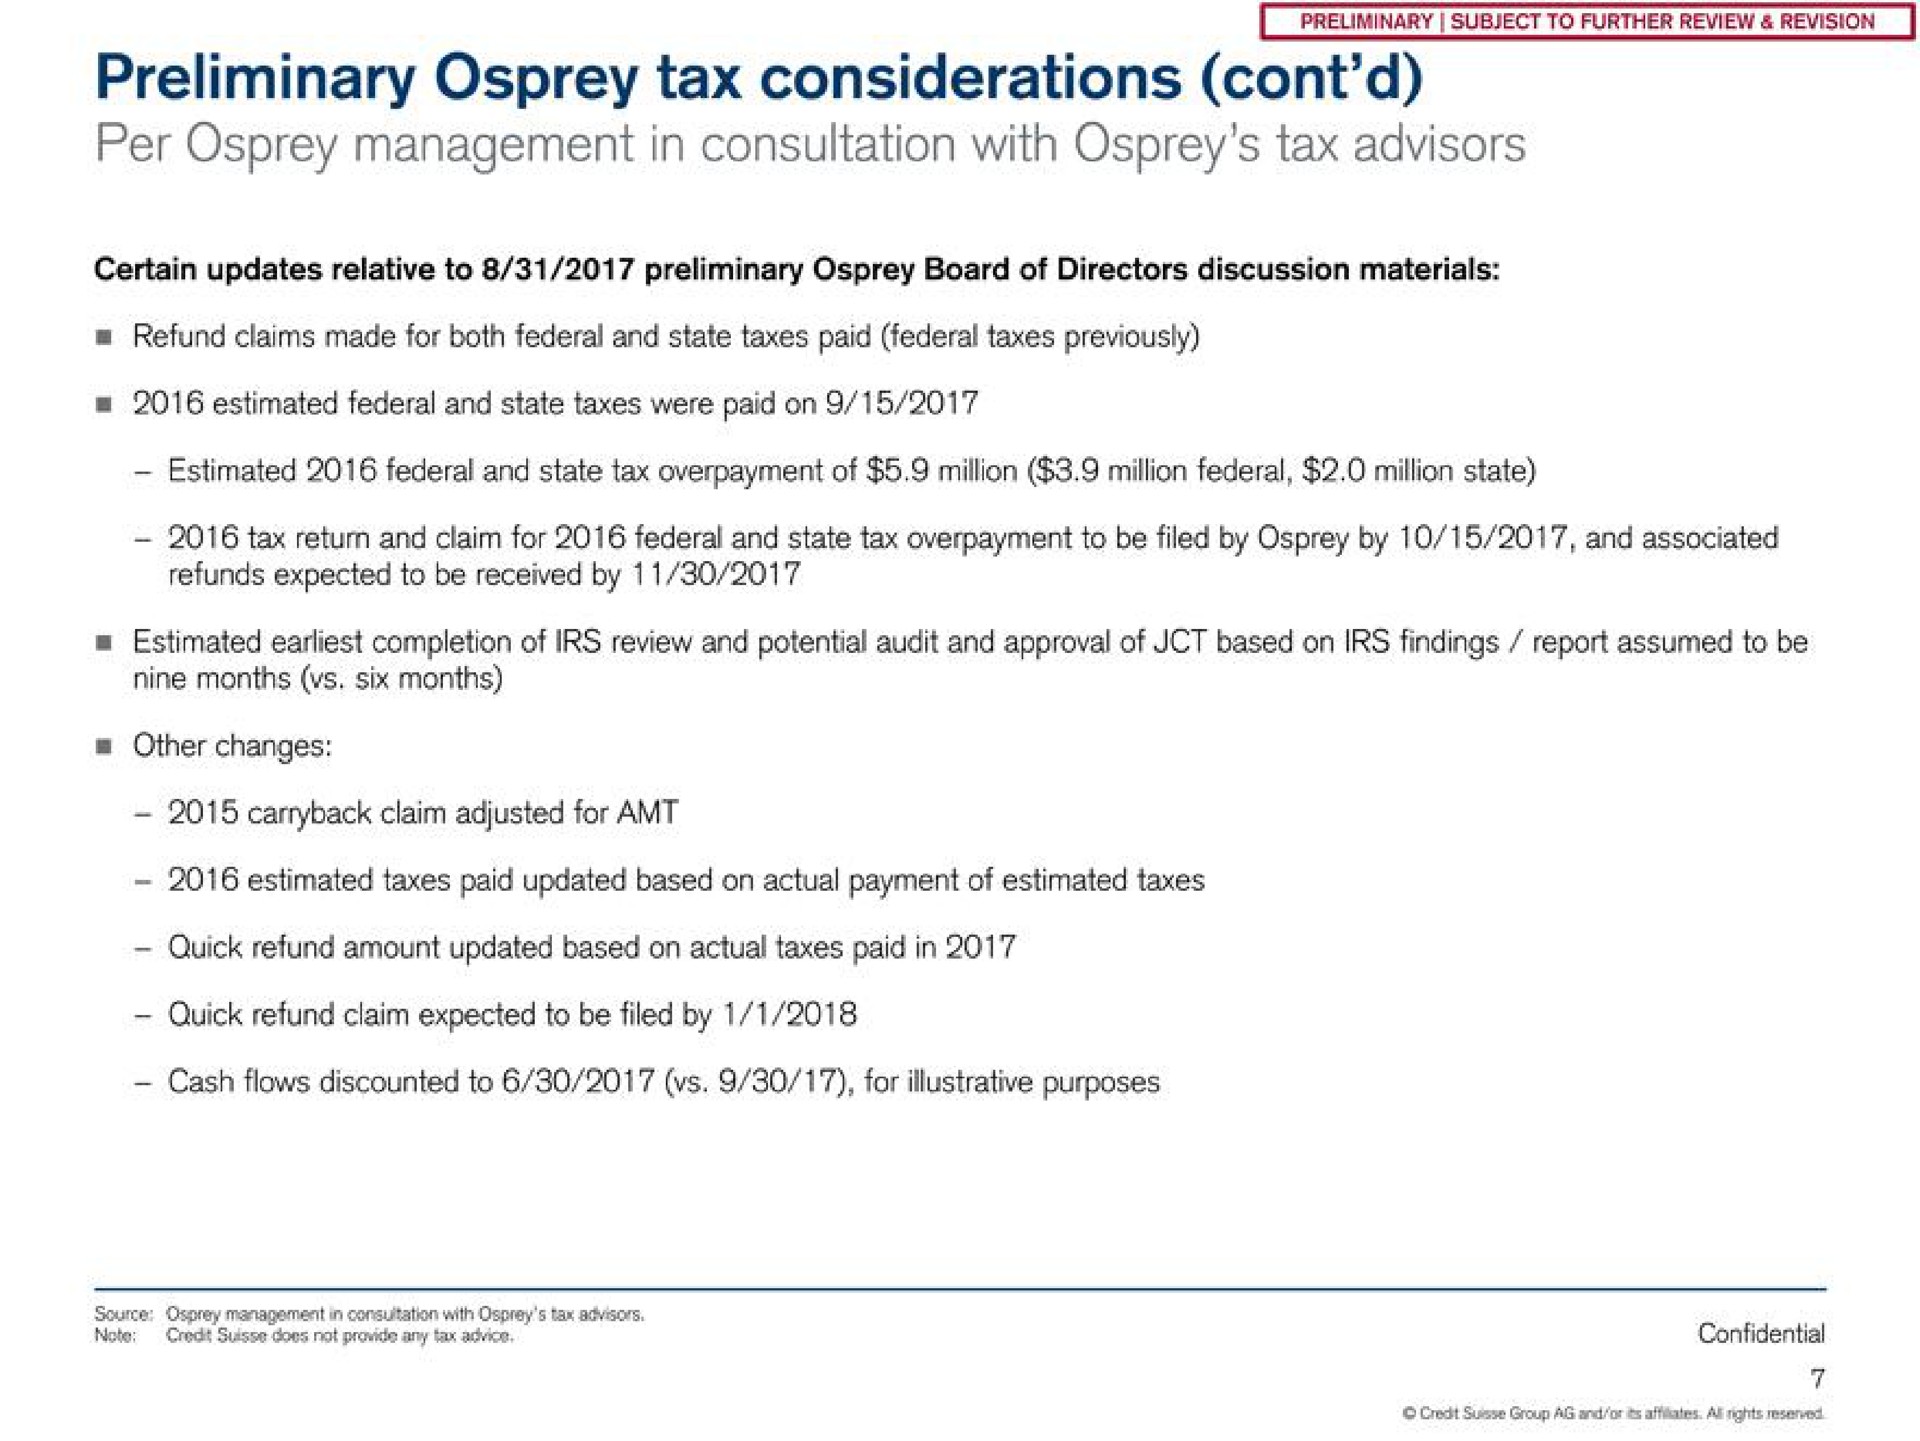 preliminary osprey tax considerations per osprey management in consultation with osprey tax advisors | Credit Suisse